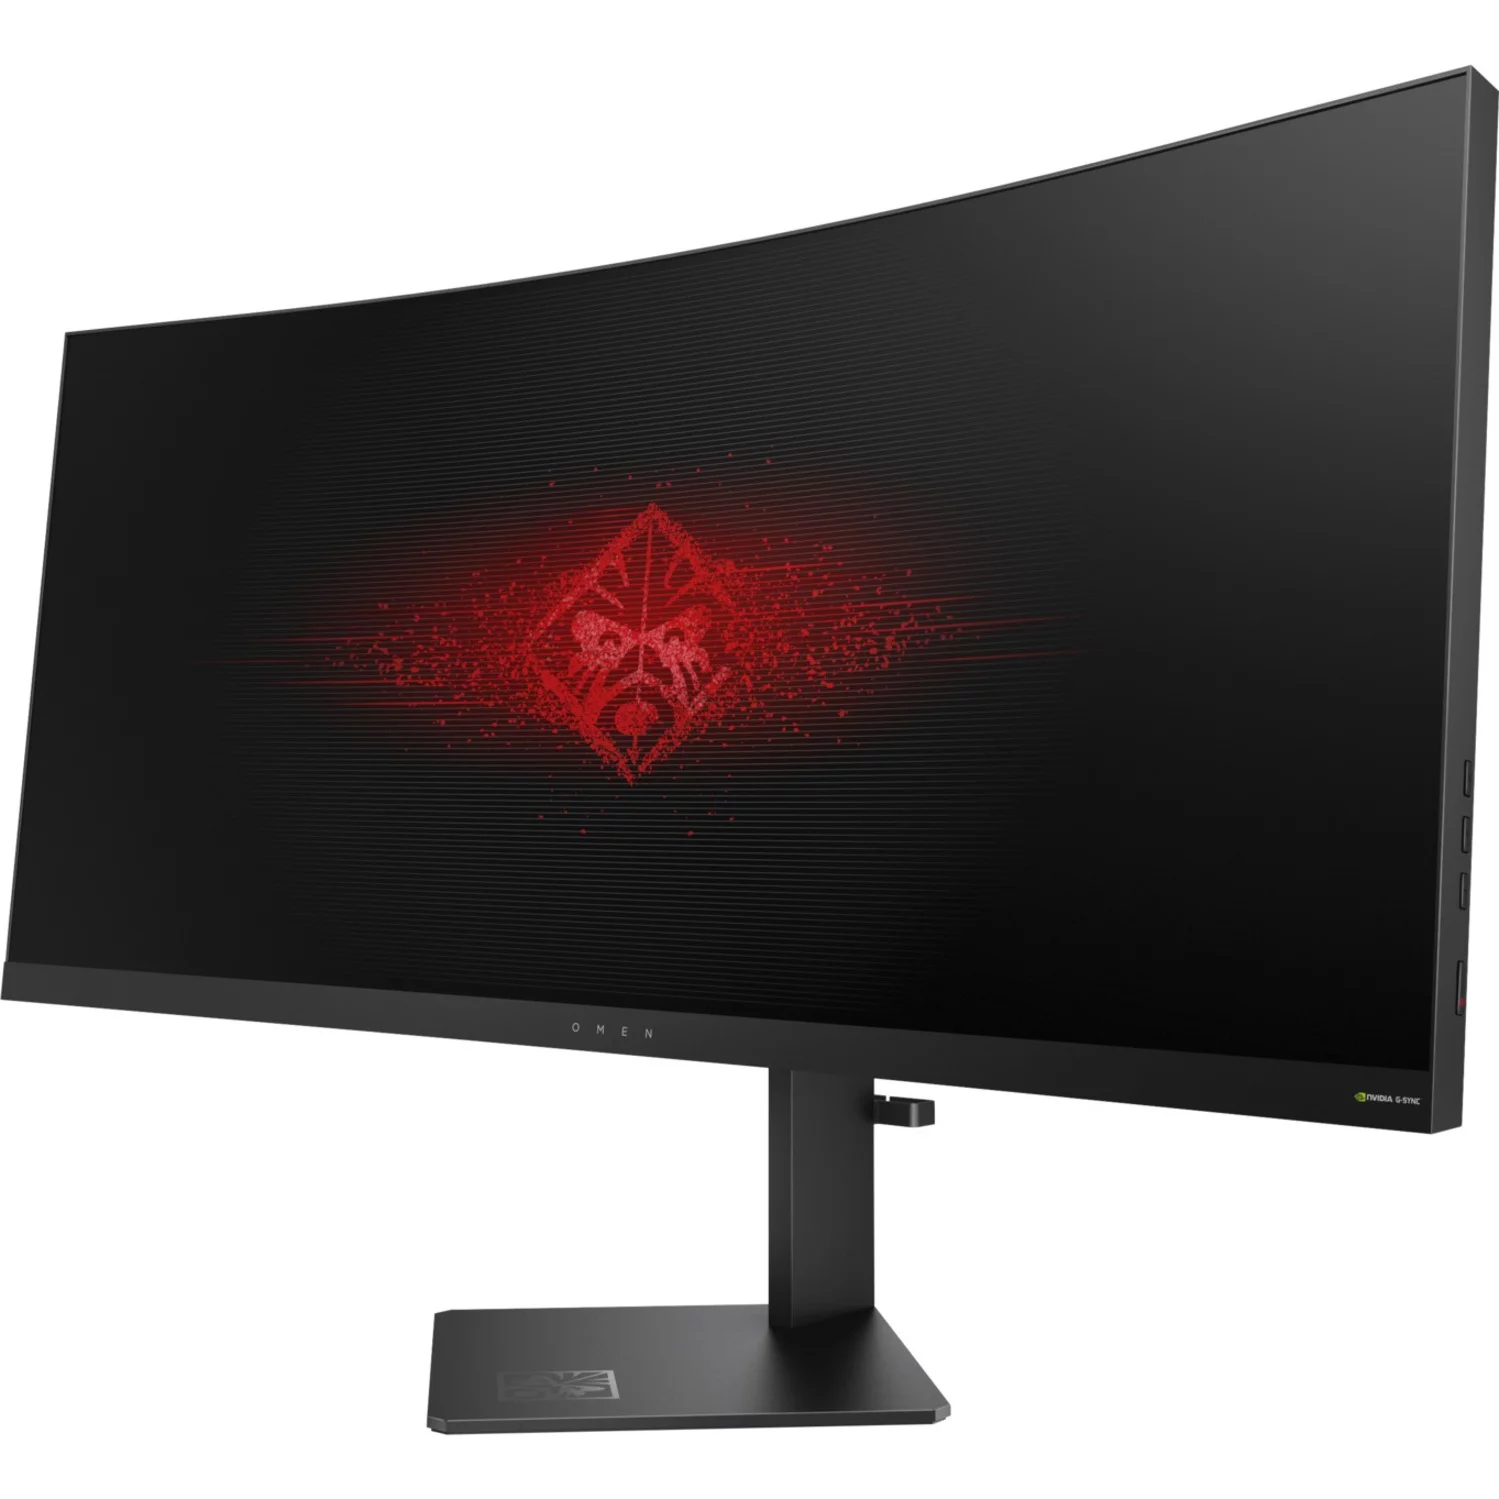 OMEN X 35 Curved Display